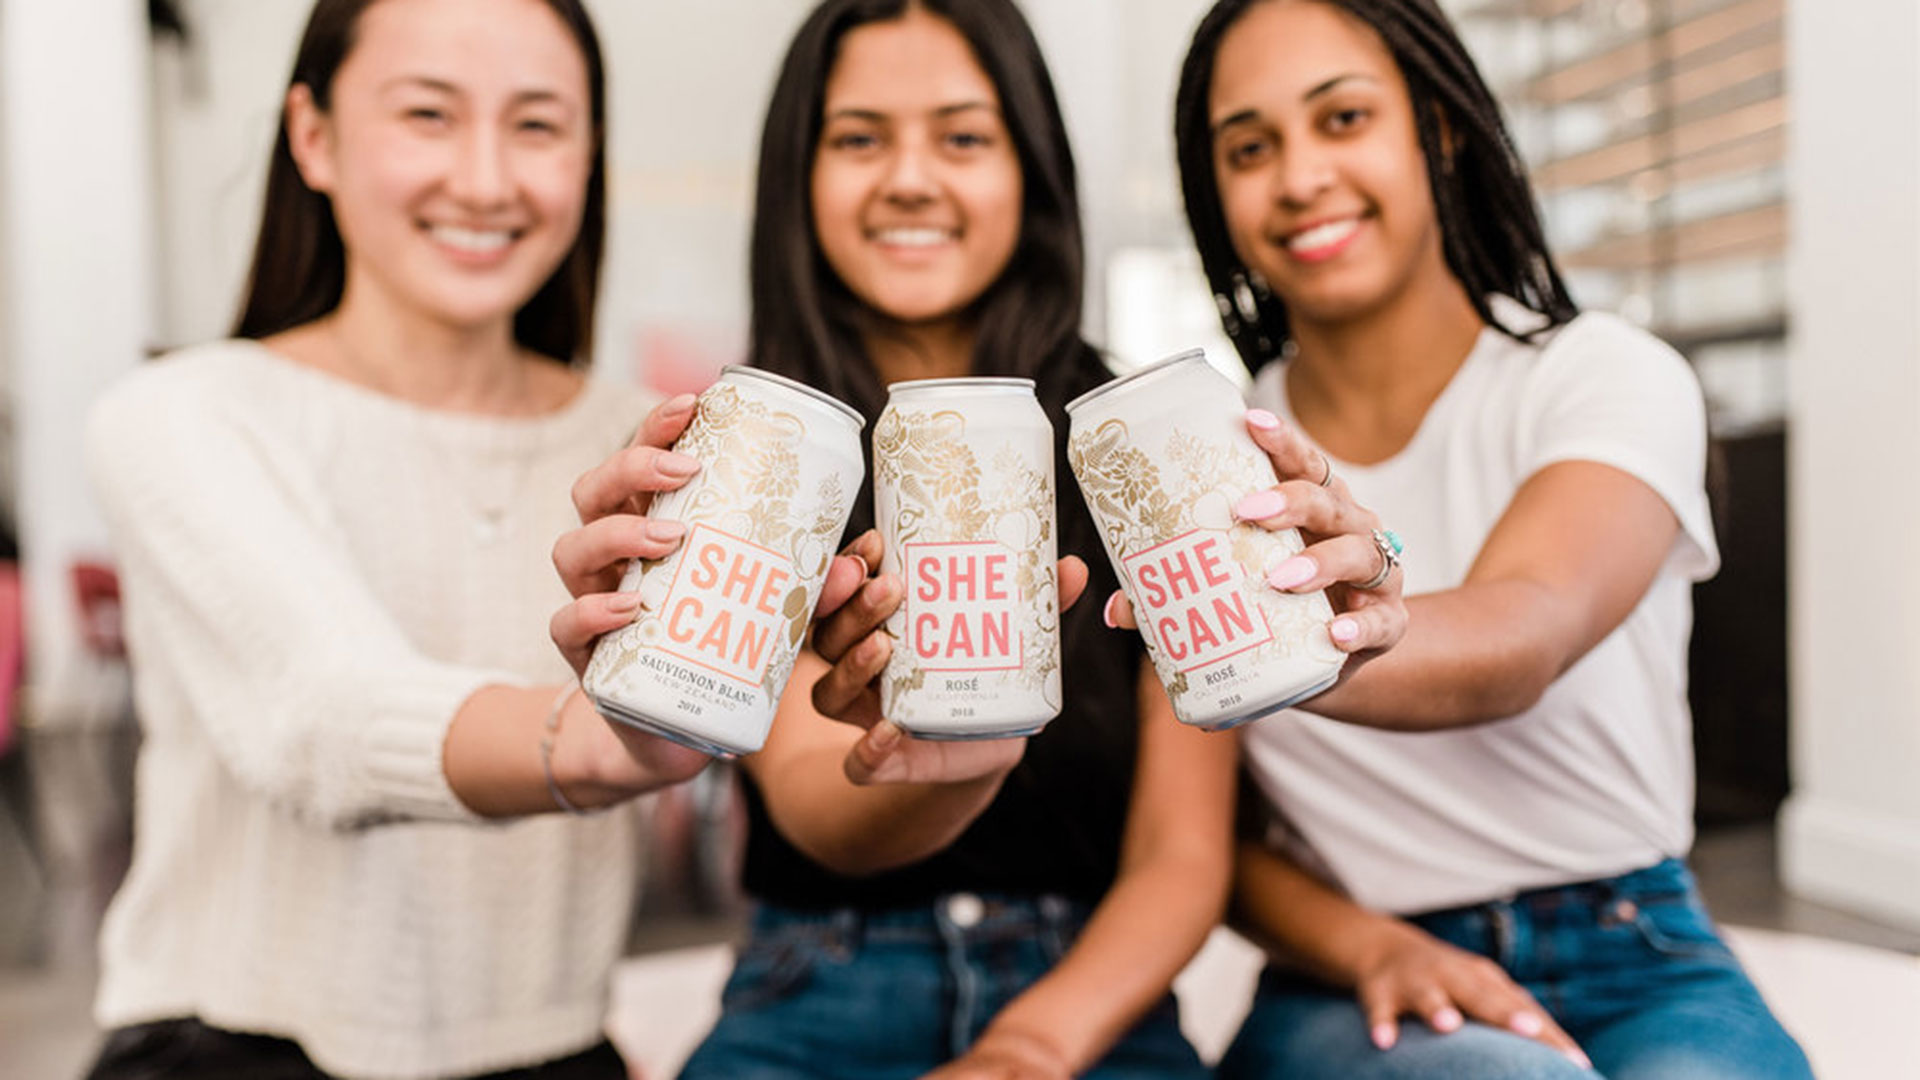 three womxn holding up "SHE CAN" wine cans